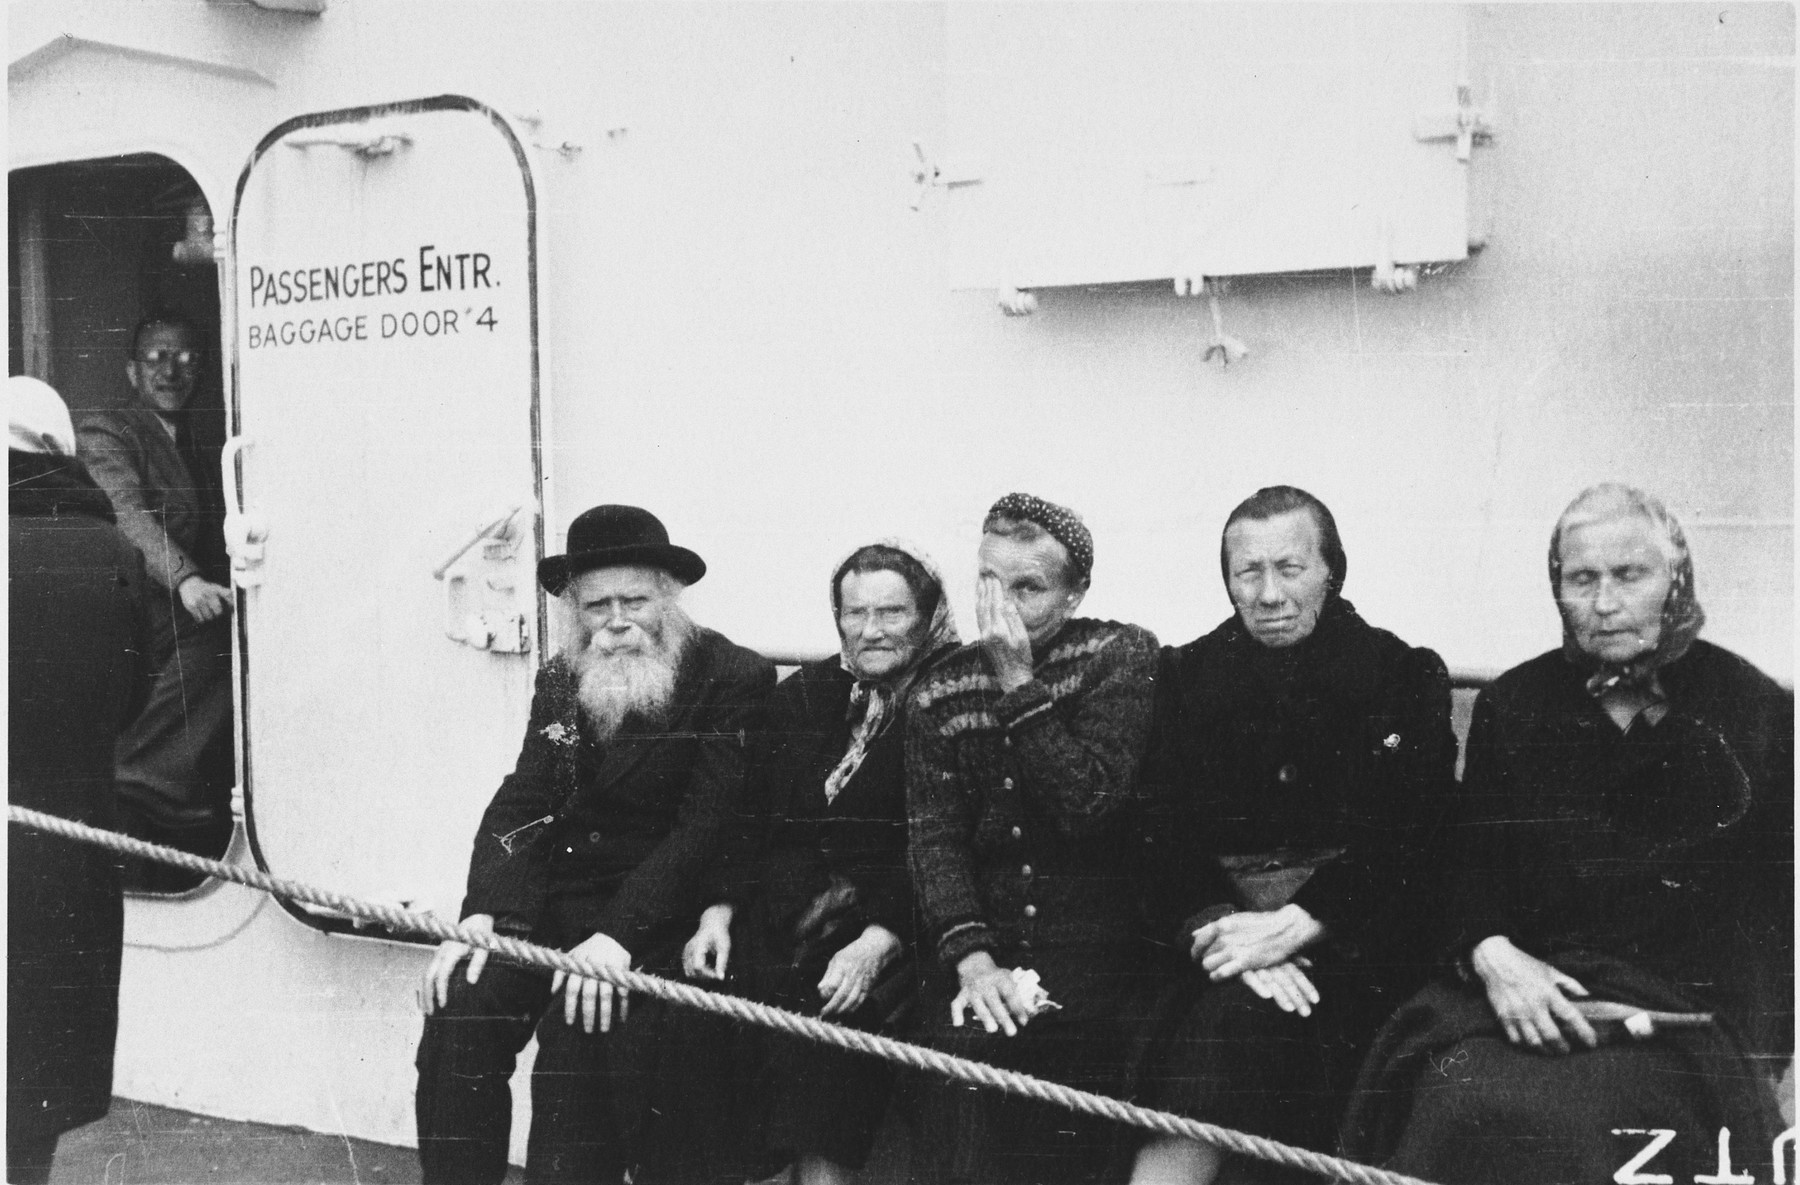 Elderly Jews sit on the deck of the SS Marine Marlin while en route to the United States.

Among those pictured (seated on the far left) are Shlomo Chaim and Brandel (nee Hoffert) Nussbaum, from Kolbuszowa, Poland. They survived the war as prisoners in a gulag in Siberia, with their daughter.